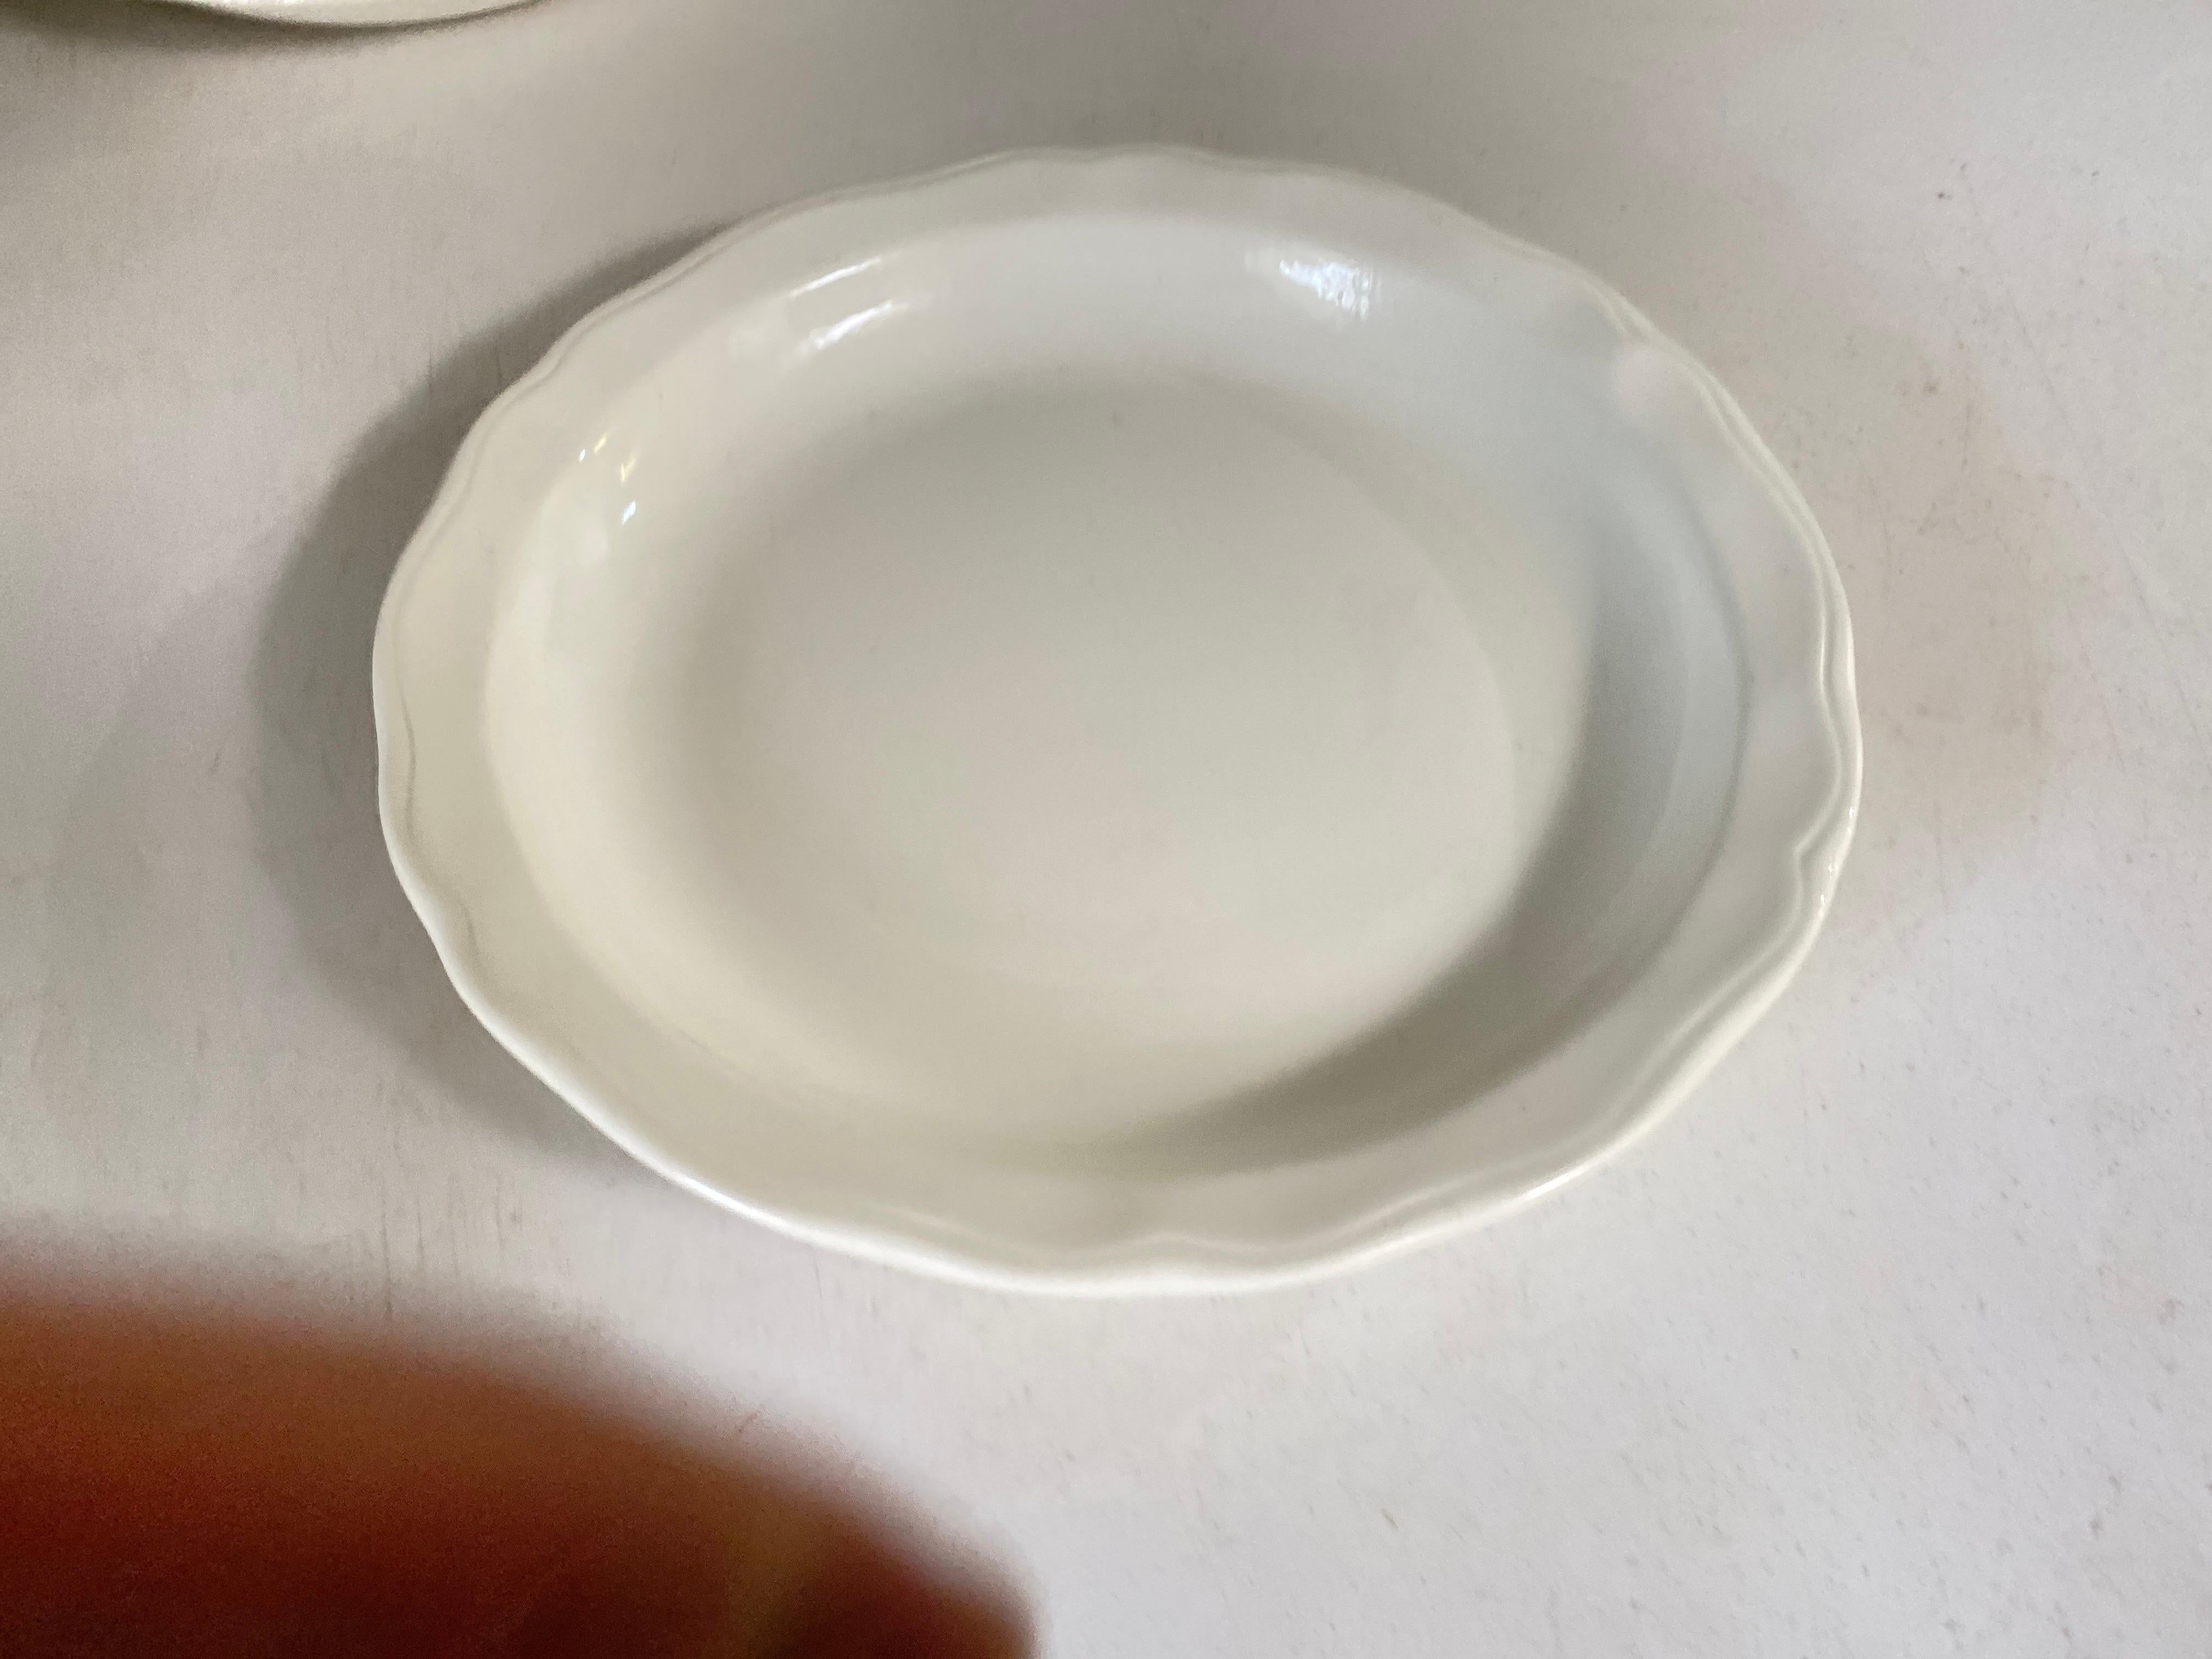 The set of Enameled Glaze large plates, is from Luneville.
The model is 